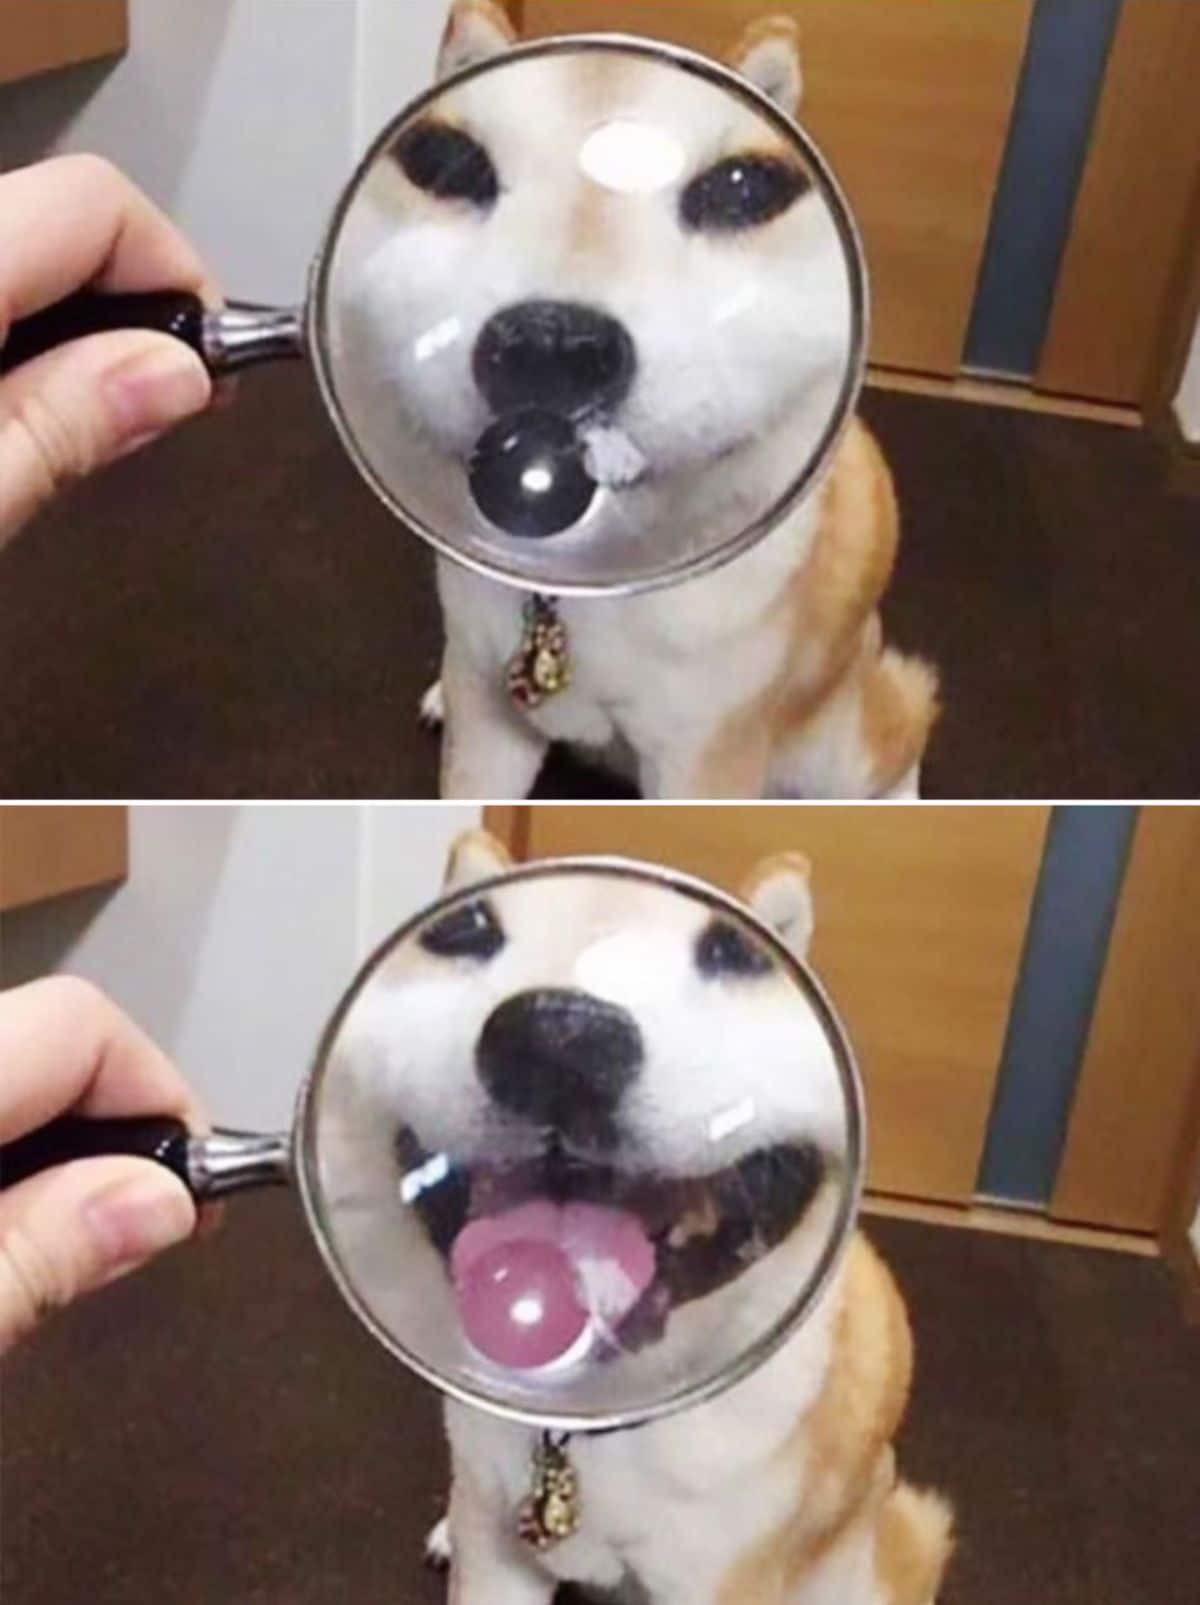 2 photos of a brown and white dog seen through magnifying glass